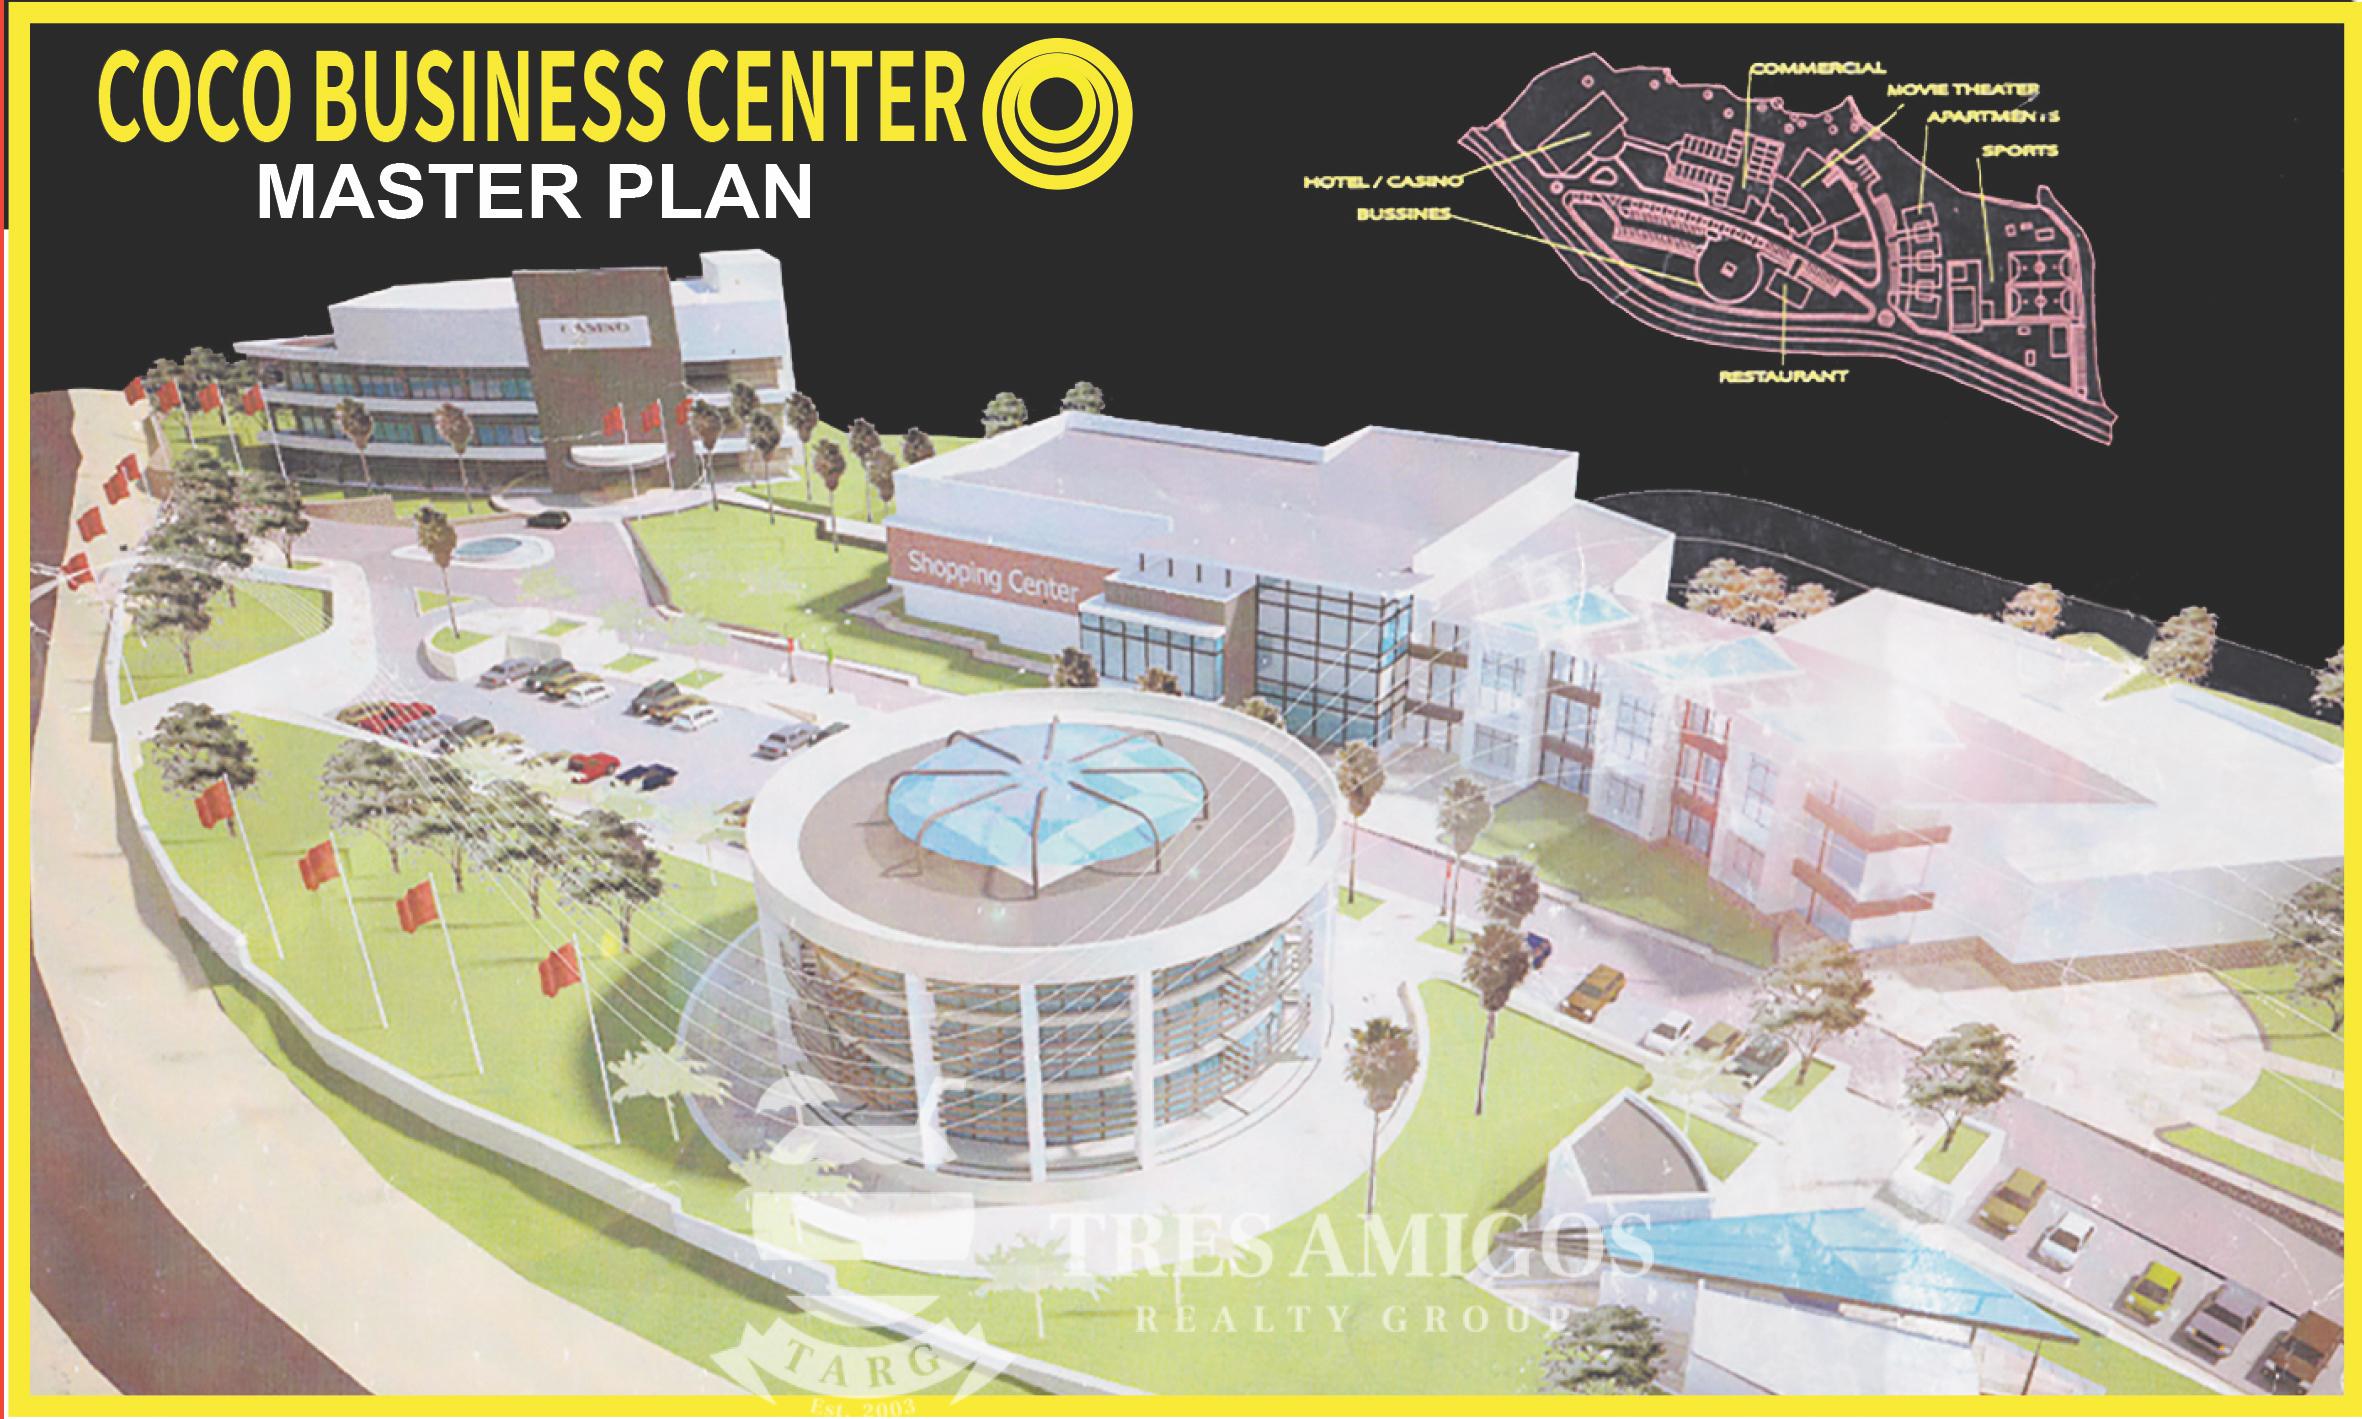 Coco Business Center Master Plan